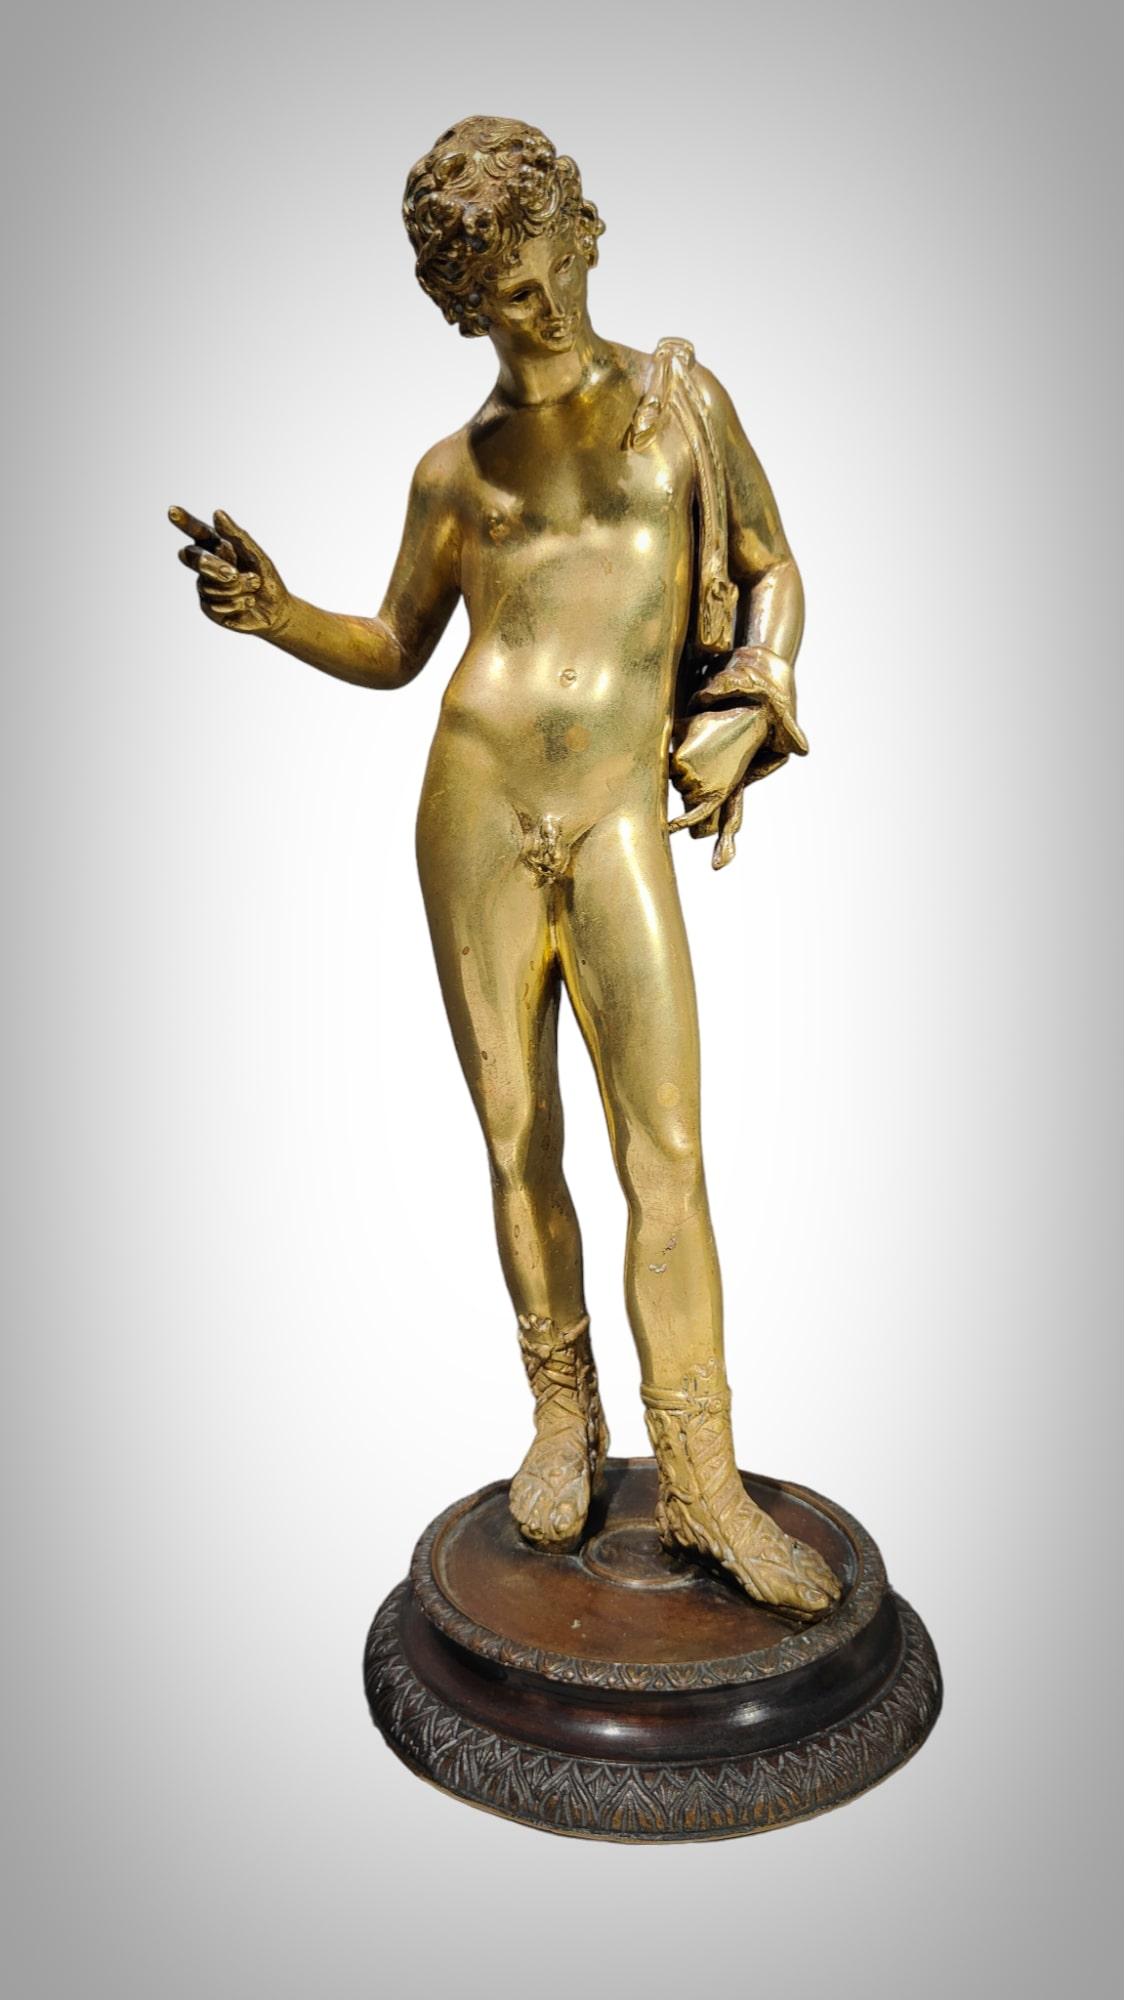 Grand Tour, 19th Century Narcissus Sculpture
Elegant gilded bronze sculpture of Narcisso. In excellent condition. Date from the beginning of the 20th century. His eyes are open. Measurements: 30 cm high and 10 cm in diameter